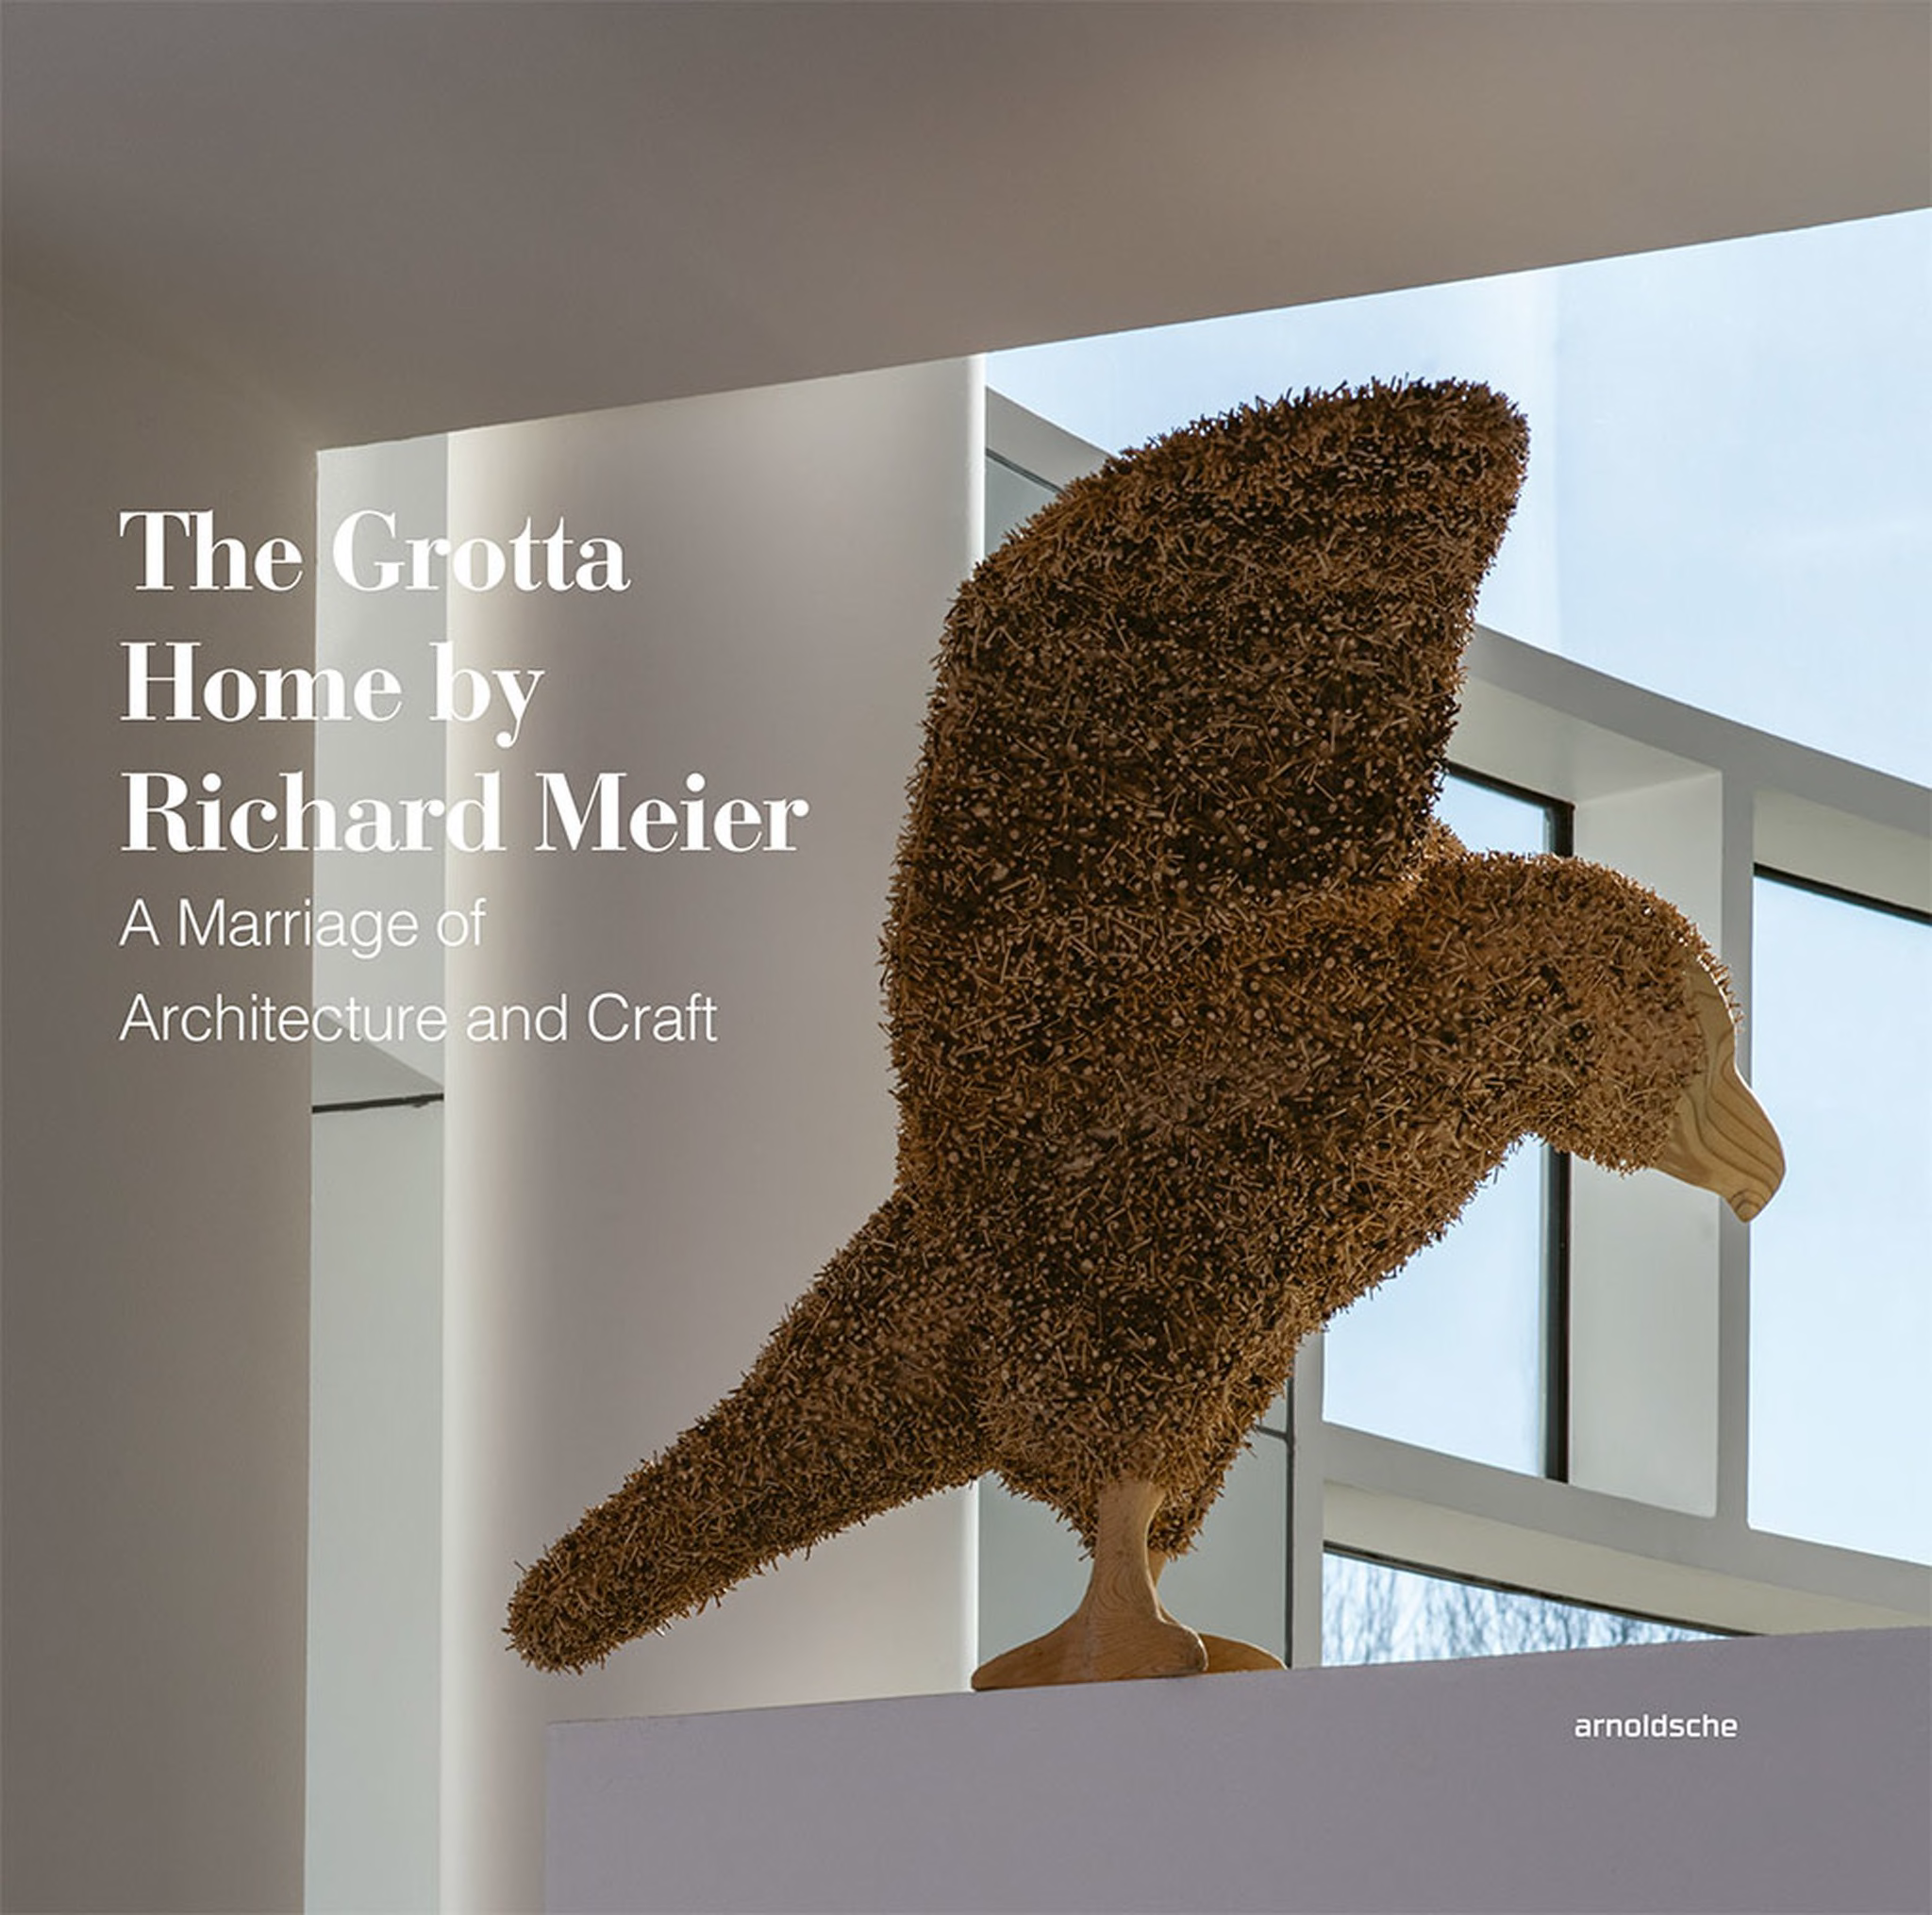 "The Grotta Home by Richard Meier: A Marriage of Architecture and Craft"